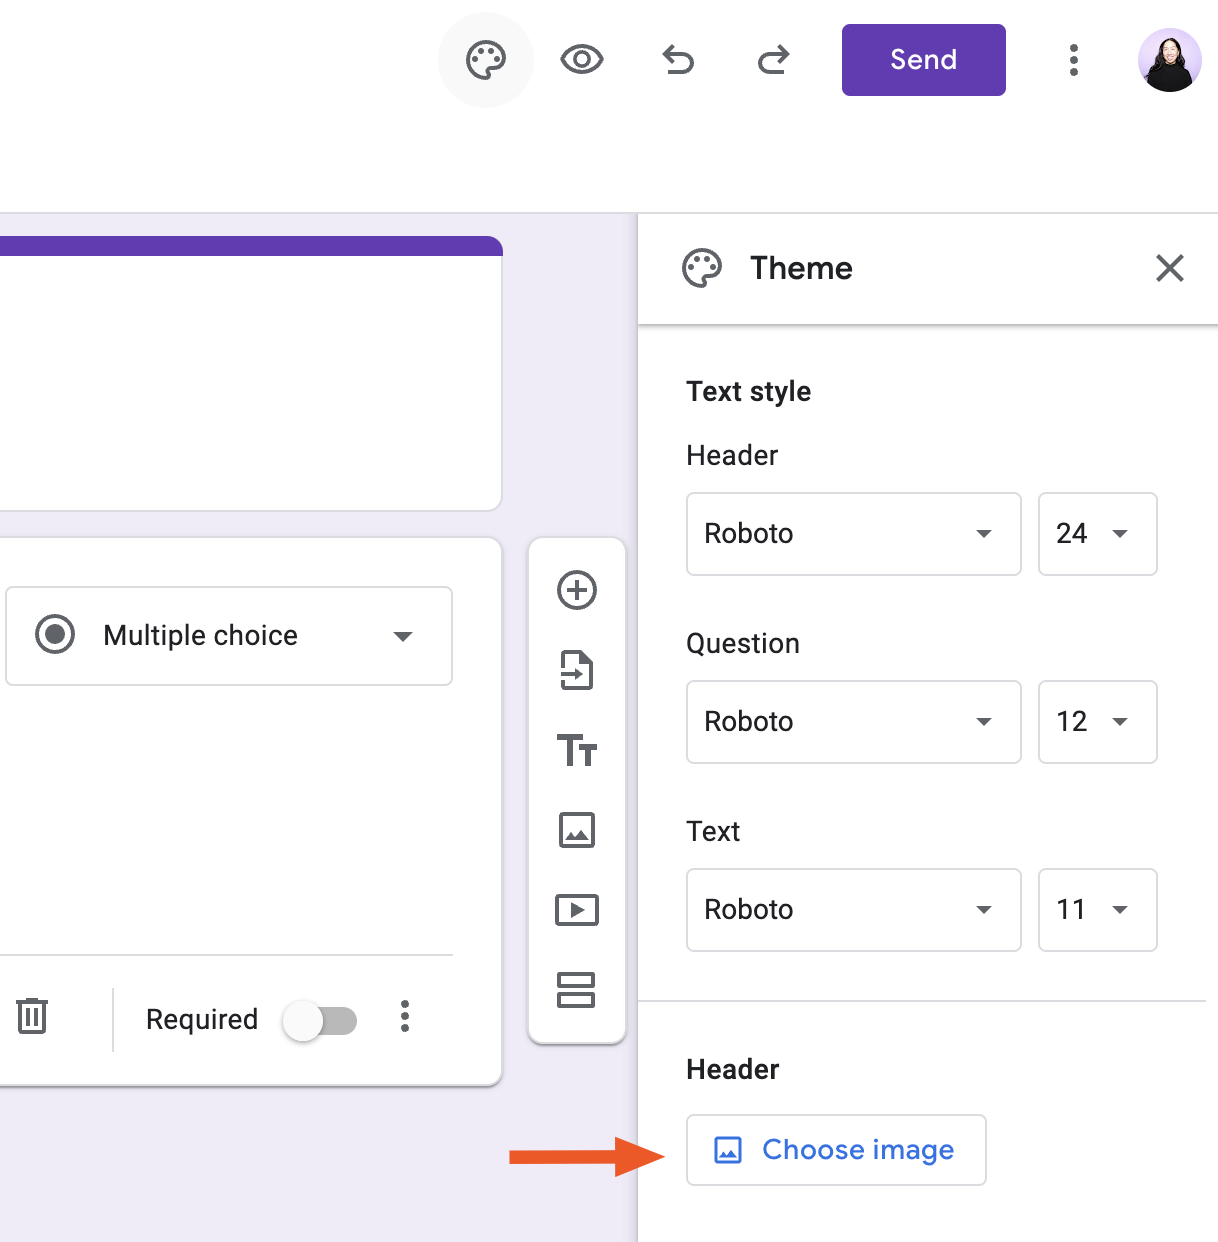 Theme pane in Google Forms with an arrow pointing to "Choose image."